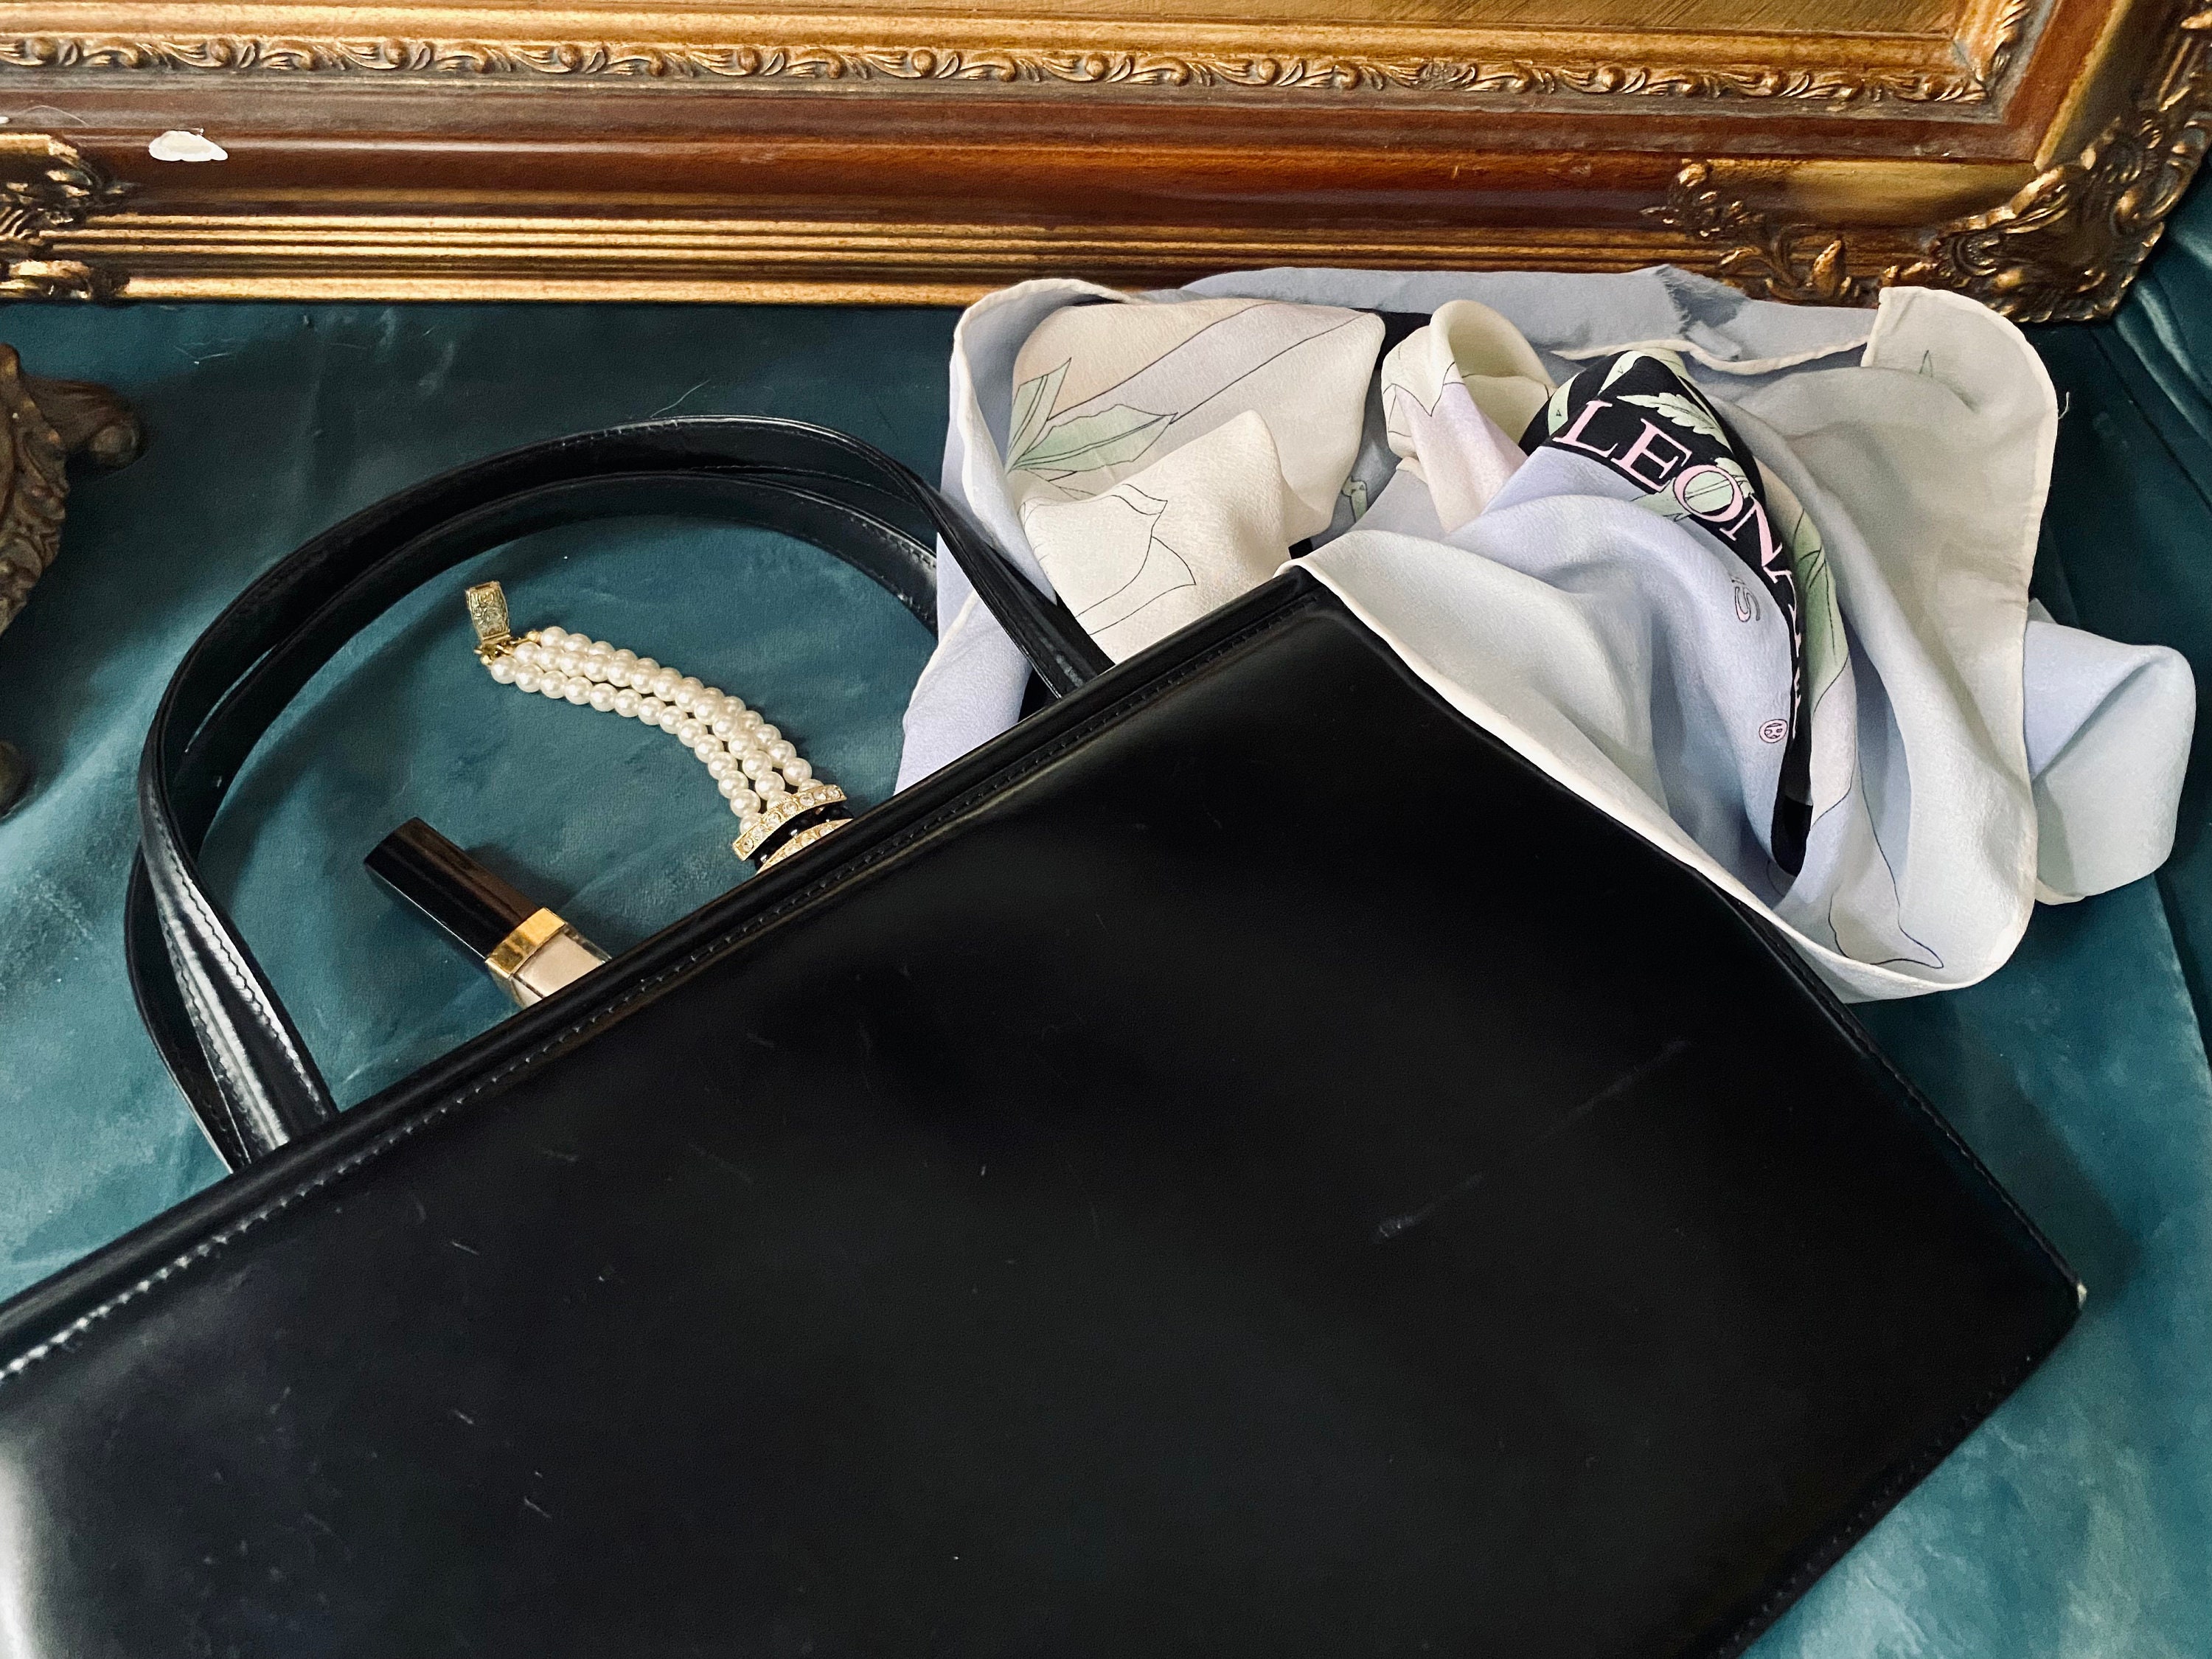 Simple Ways to Clean a Leather Purse - wikiHow